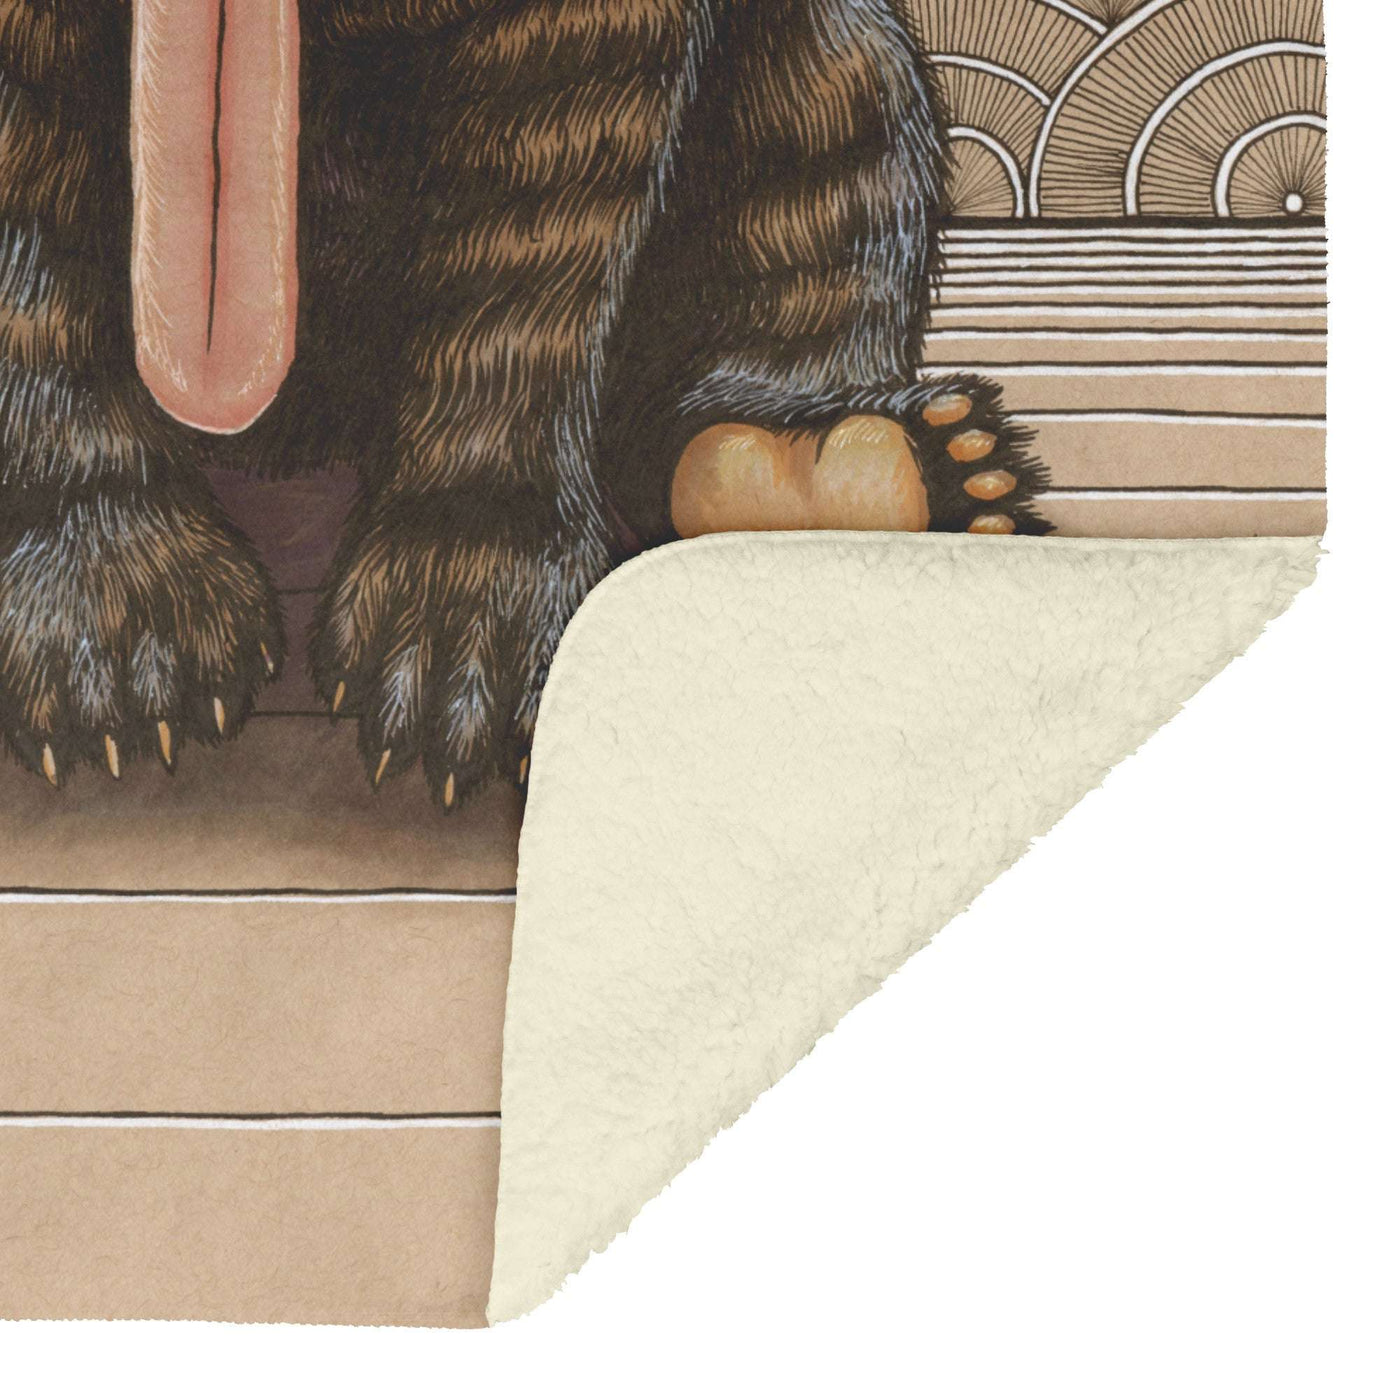 An illustration of a Sun Bear Blanket sitting with its tongue out, resting its paws over the edge of a surface adorned with linear patterns.